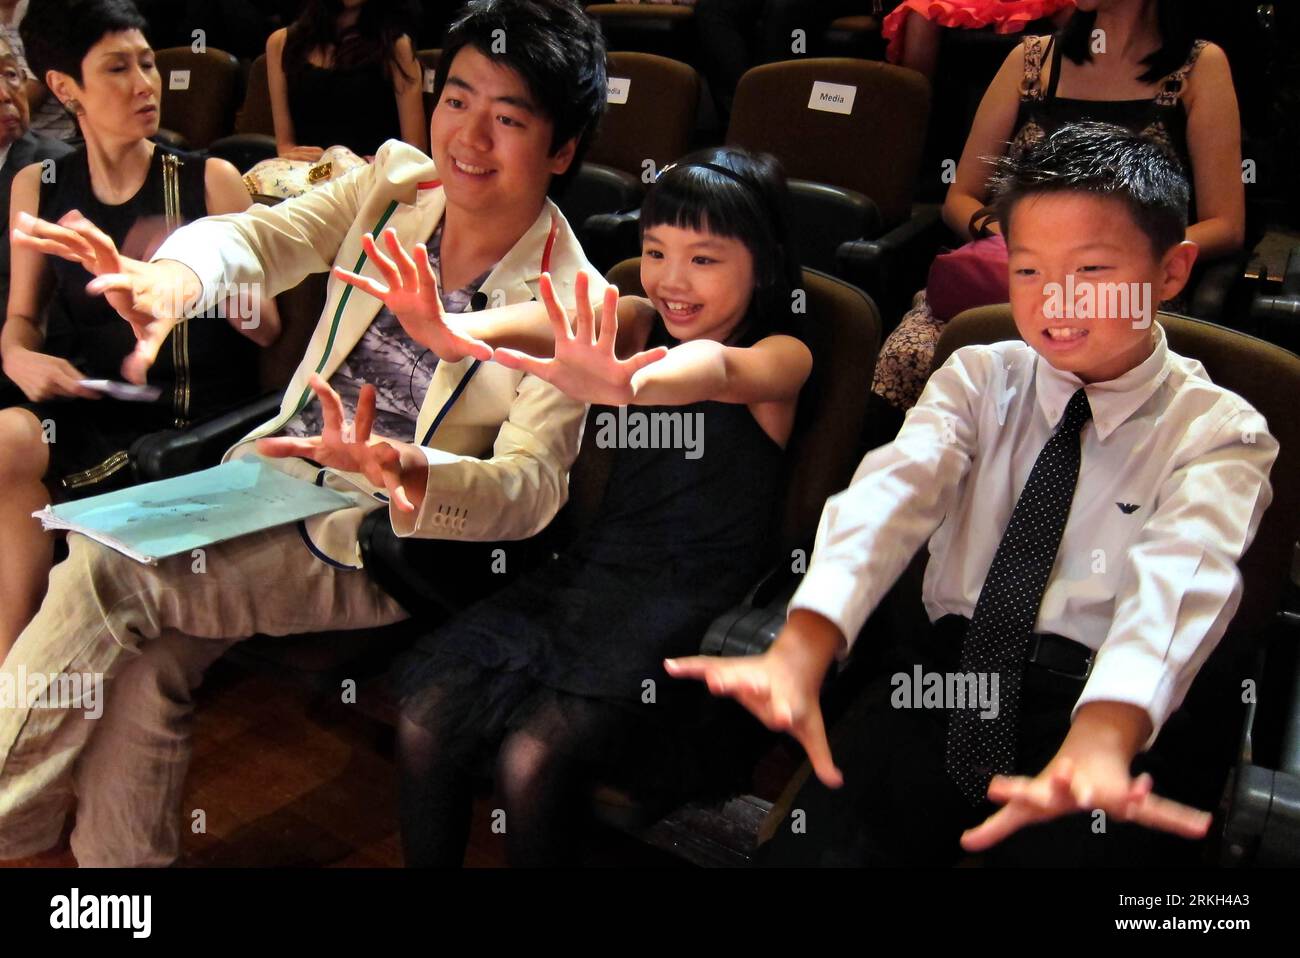 Bildnummer: 55682067  Datum: 06.08.2011  Copyright: imago/Xinhua (110806) -- HONG KONG, Aug. 06, 2011 (Xinhua) -- Chinese pianist Lang Lang (2nd L) poses for photo with Kate Xintong Lee (2nd R) and Jonathan Jun Yang (1st R), two Hong Kong winners of this year s Young Scholars Program, in Hong Kong, south China, Aug. 6, 2011. Lang Lang announced the Hong Kong winners of this year s Young Scholars Program here Saturday. The Young Scholars Program is a signature initiative of the Lang Lang International Music Foundation, in which Lang Lang personally chooses and mentors talented young pianists fr Stock Photo